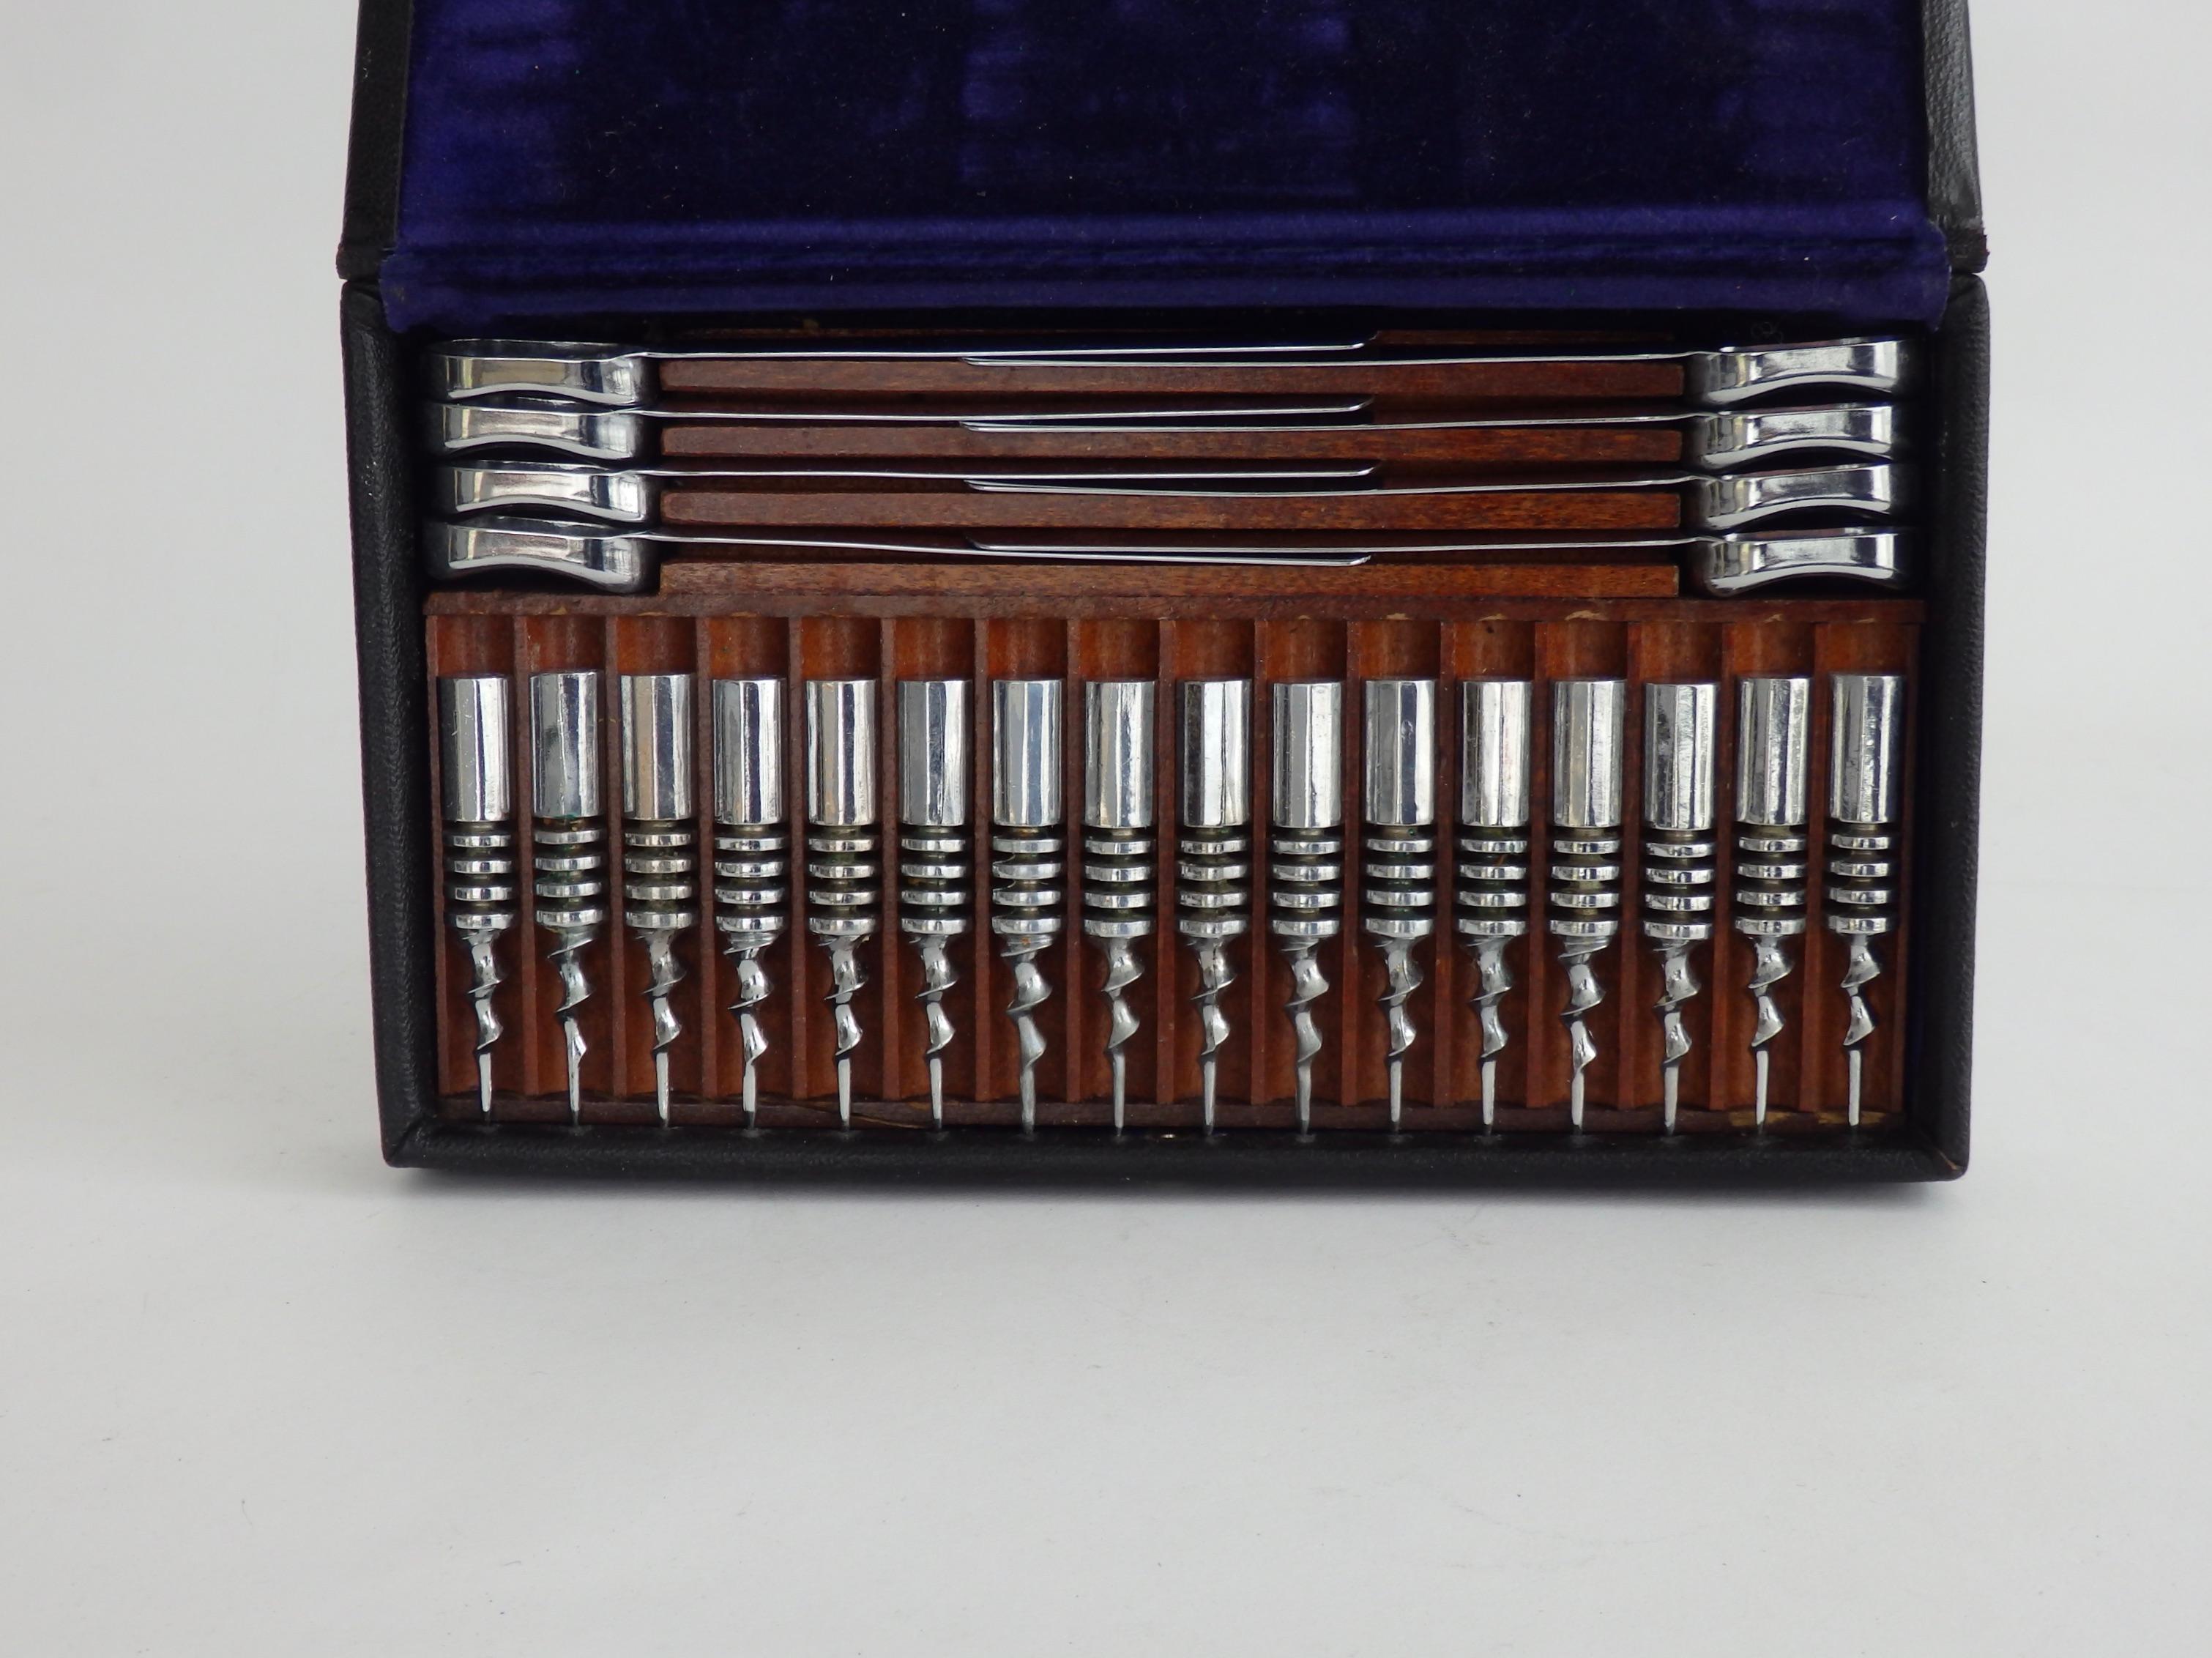 Streamlined Art Deco corn holders and butter pat holders in chrome. 24 pieces in leather covered fitted mahogany box. Made and patented by Hacker co. Excellent condition. Possibly never used.